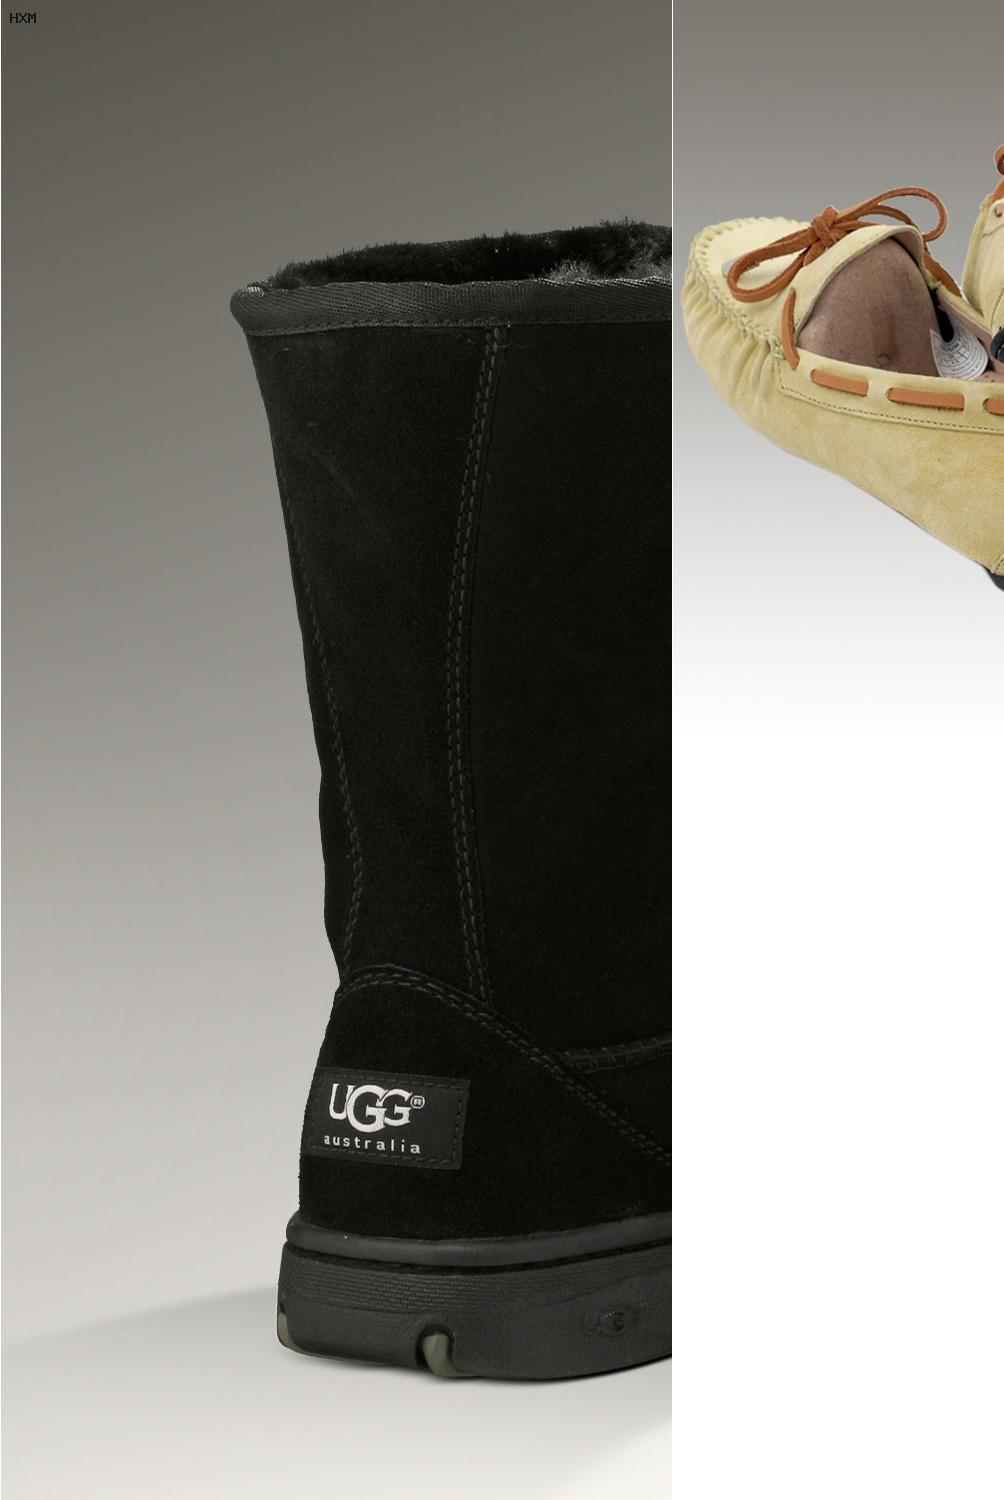 costco uggs style boots